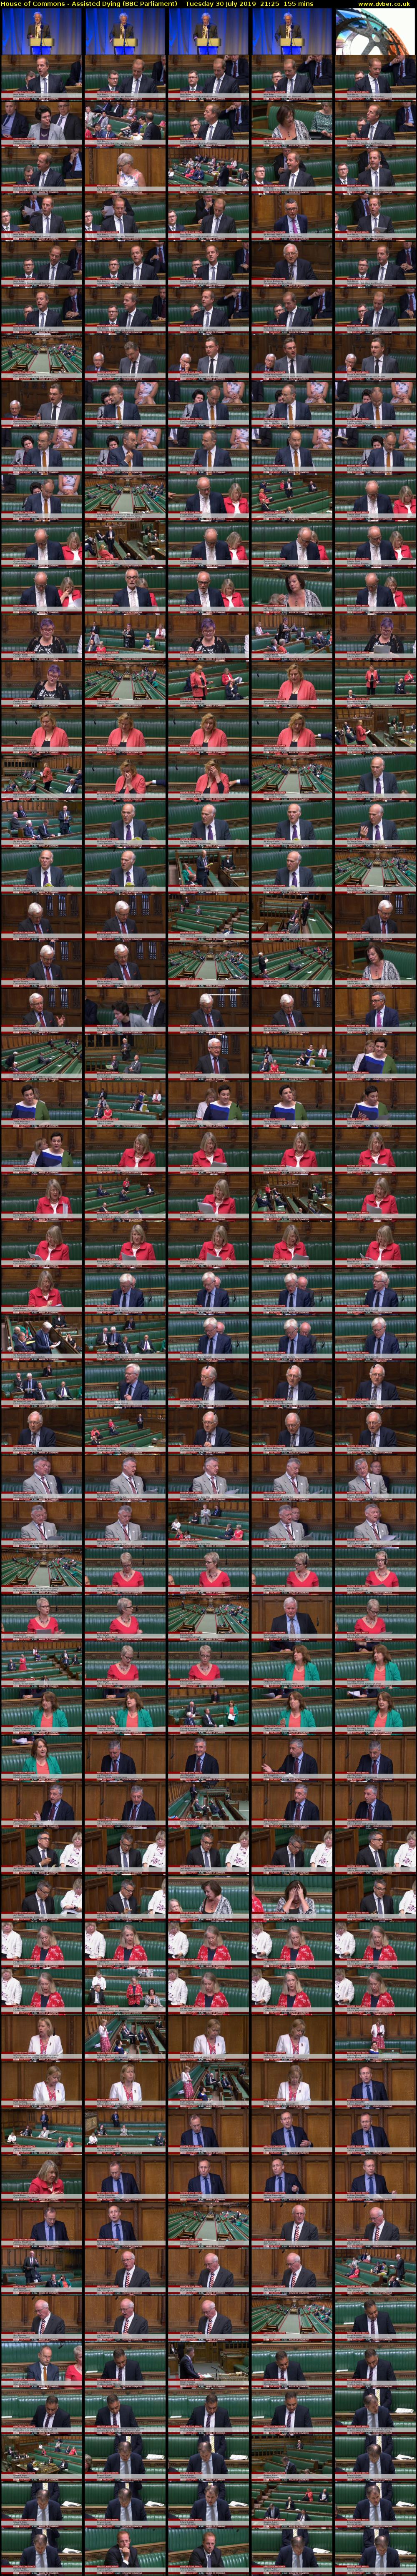 House of Commons - Assisted Dying (BBC Parliament) Tuesday 30 July 2019 21:25 - 00:00